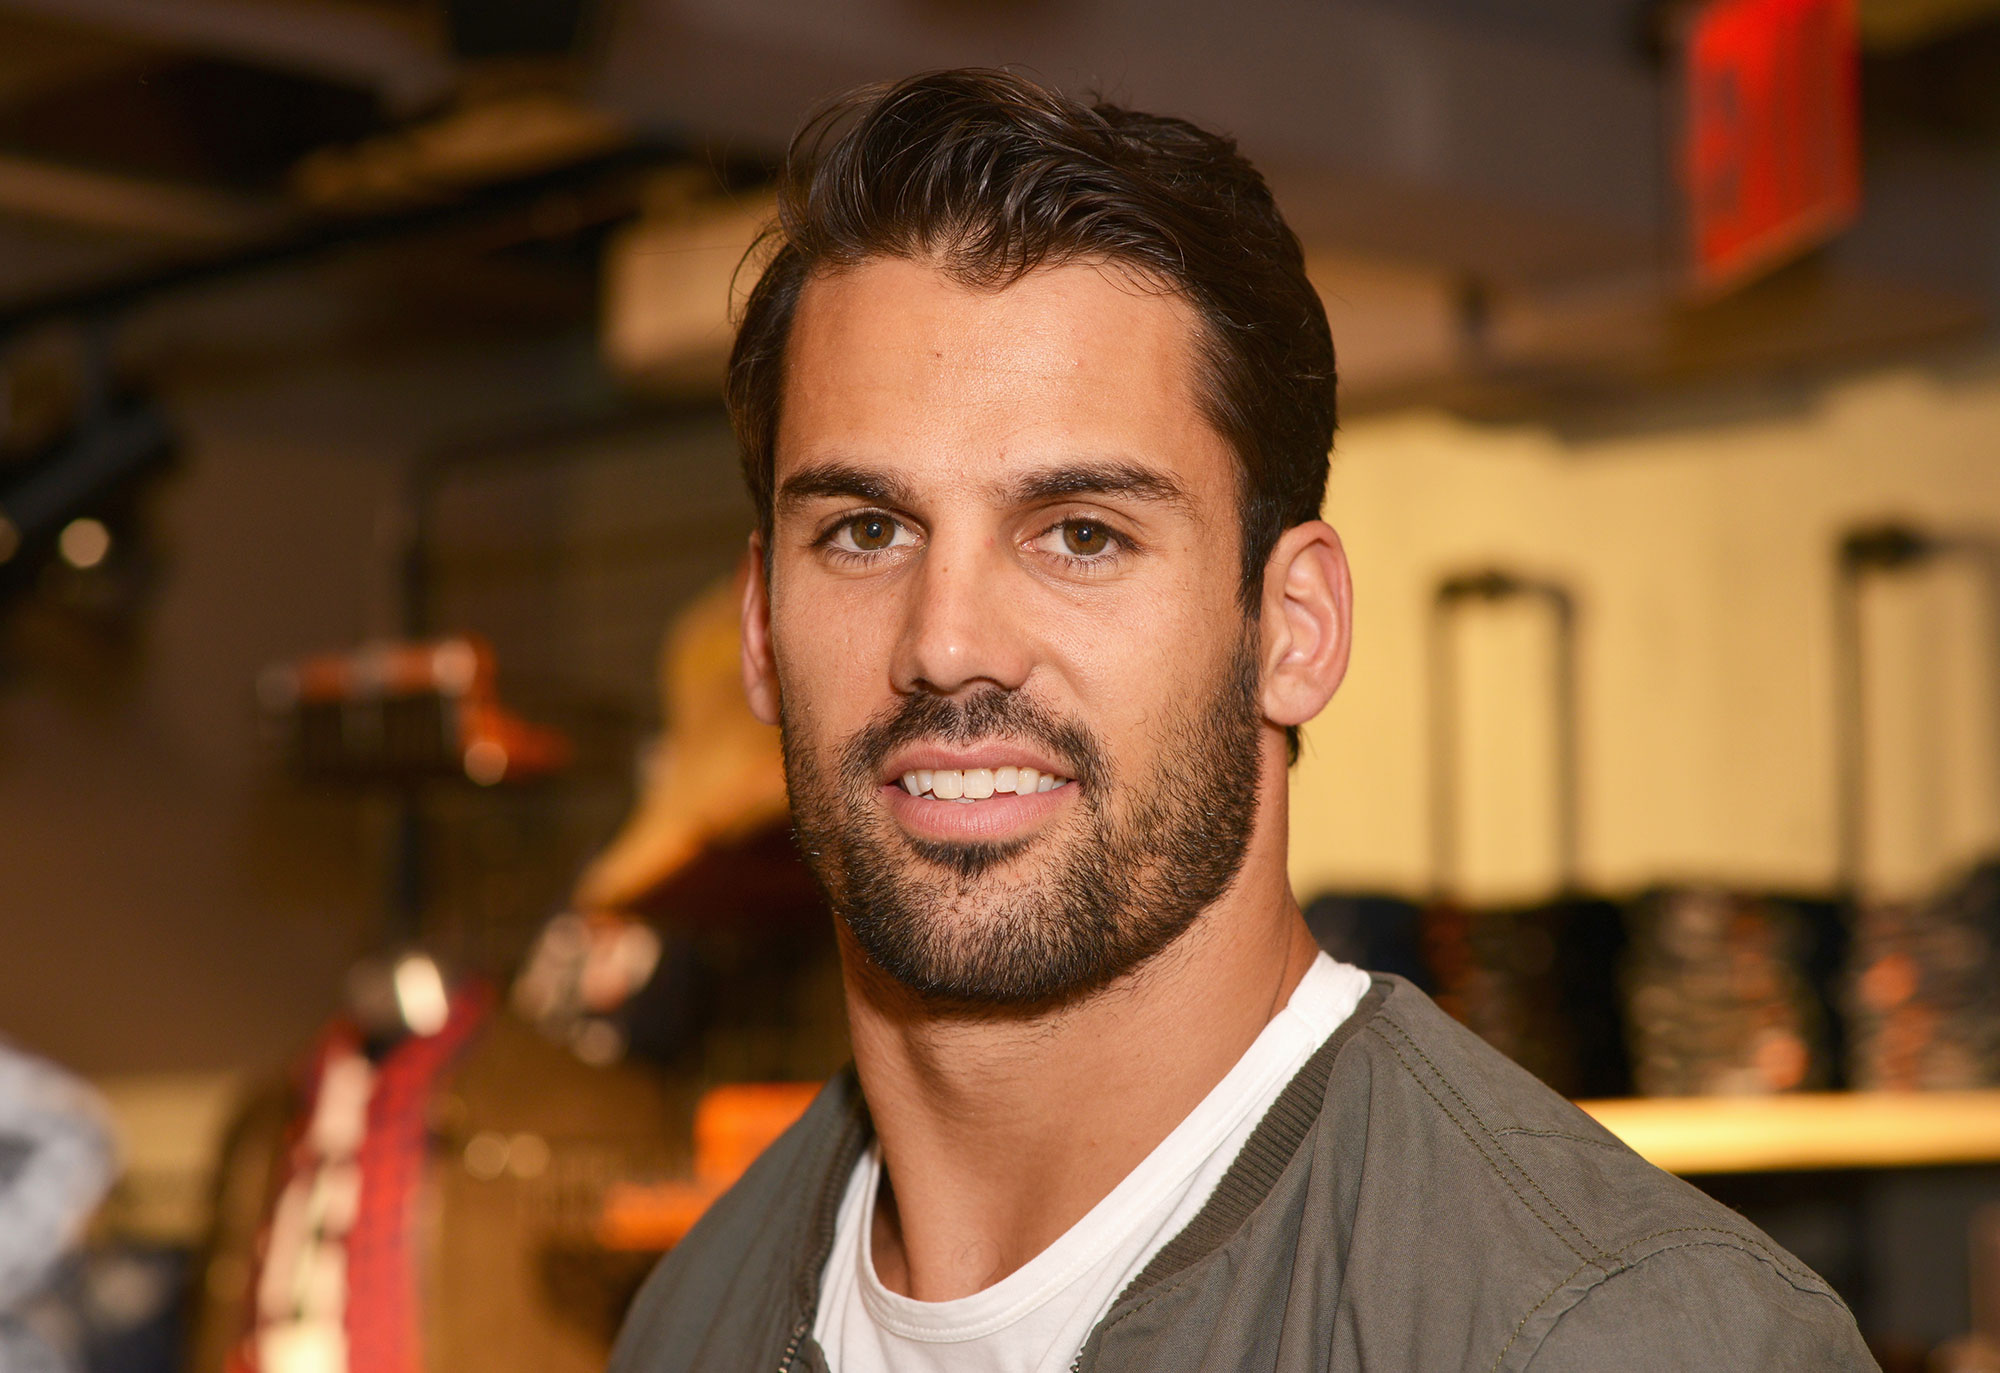 Eric Decker Net Worth Could Reach 30 Million in Two Years